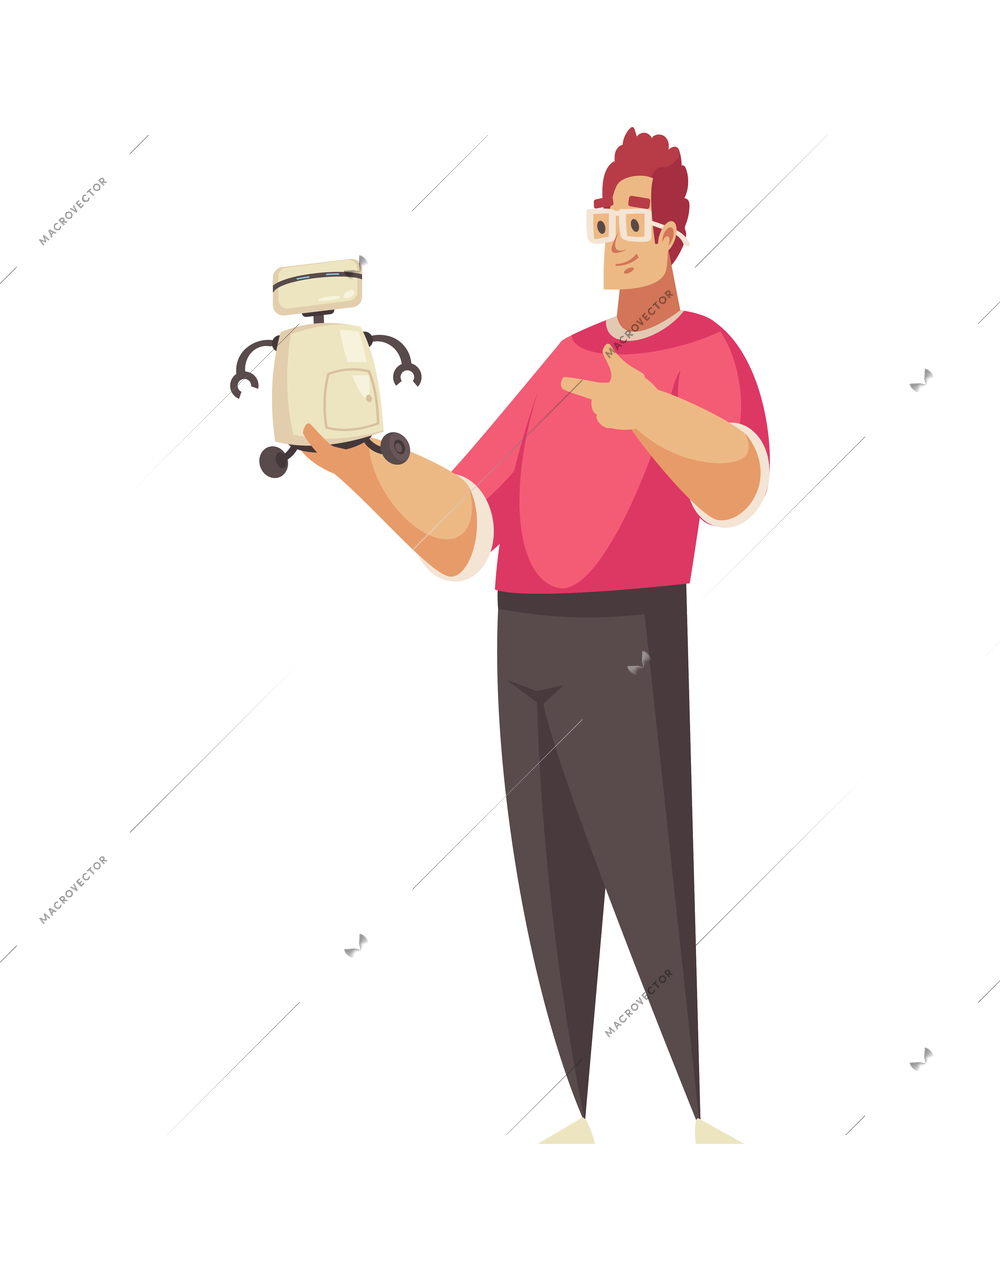 Robotics kids education composition with cartoon character of adult guy looking at toy robot vector illustration